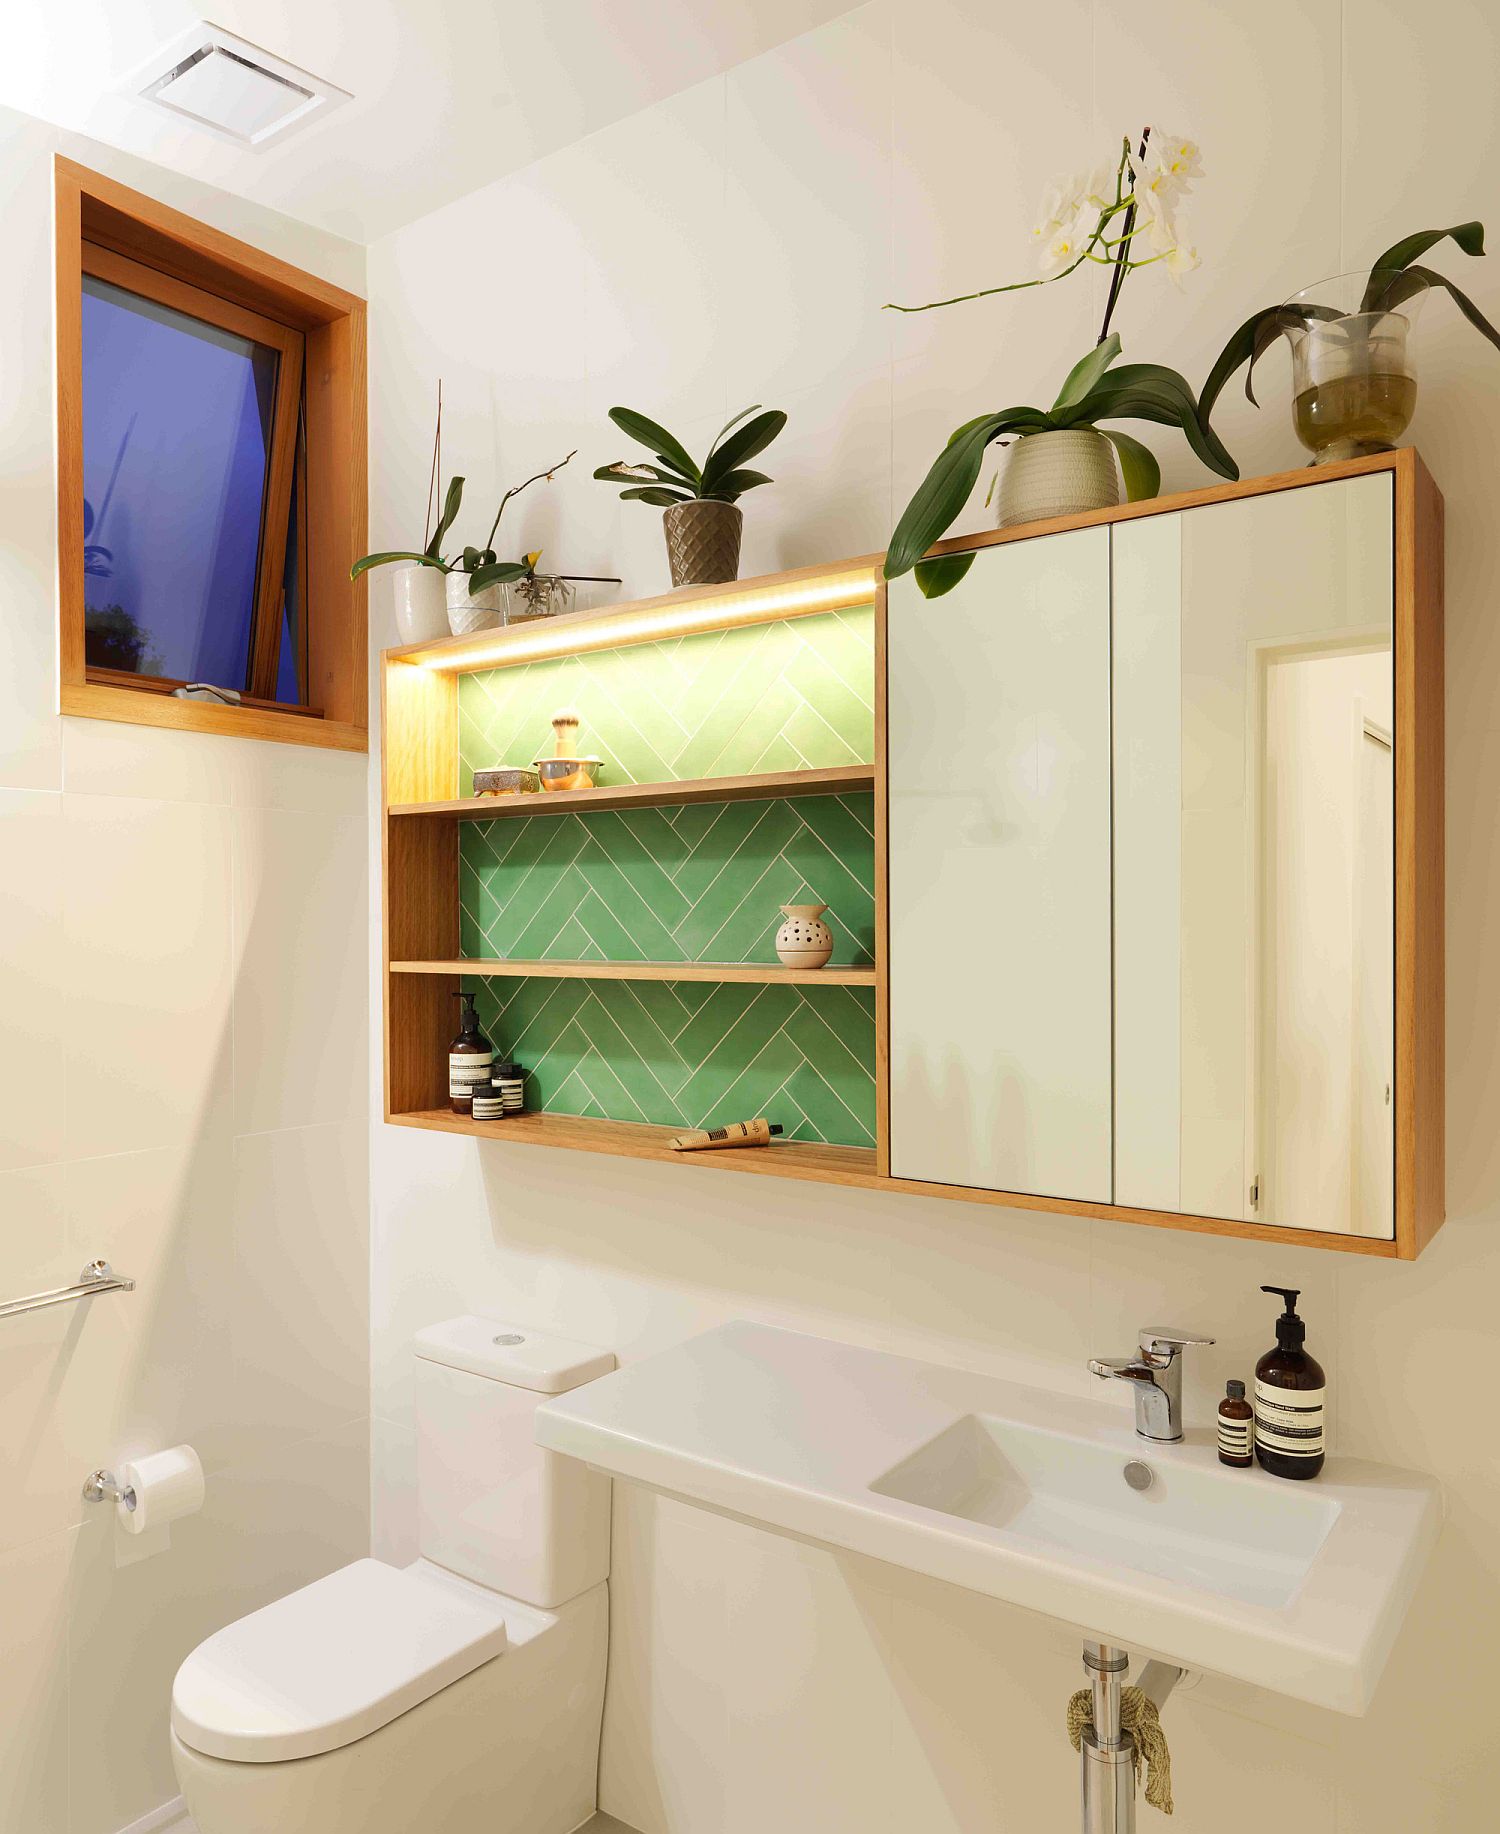 Bright and light-filled bathroom in white with wooden medicine cabinet